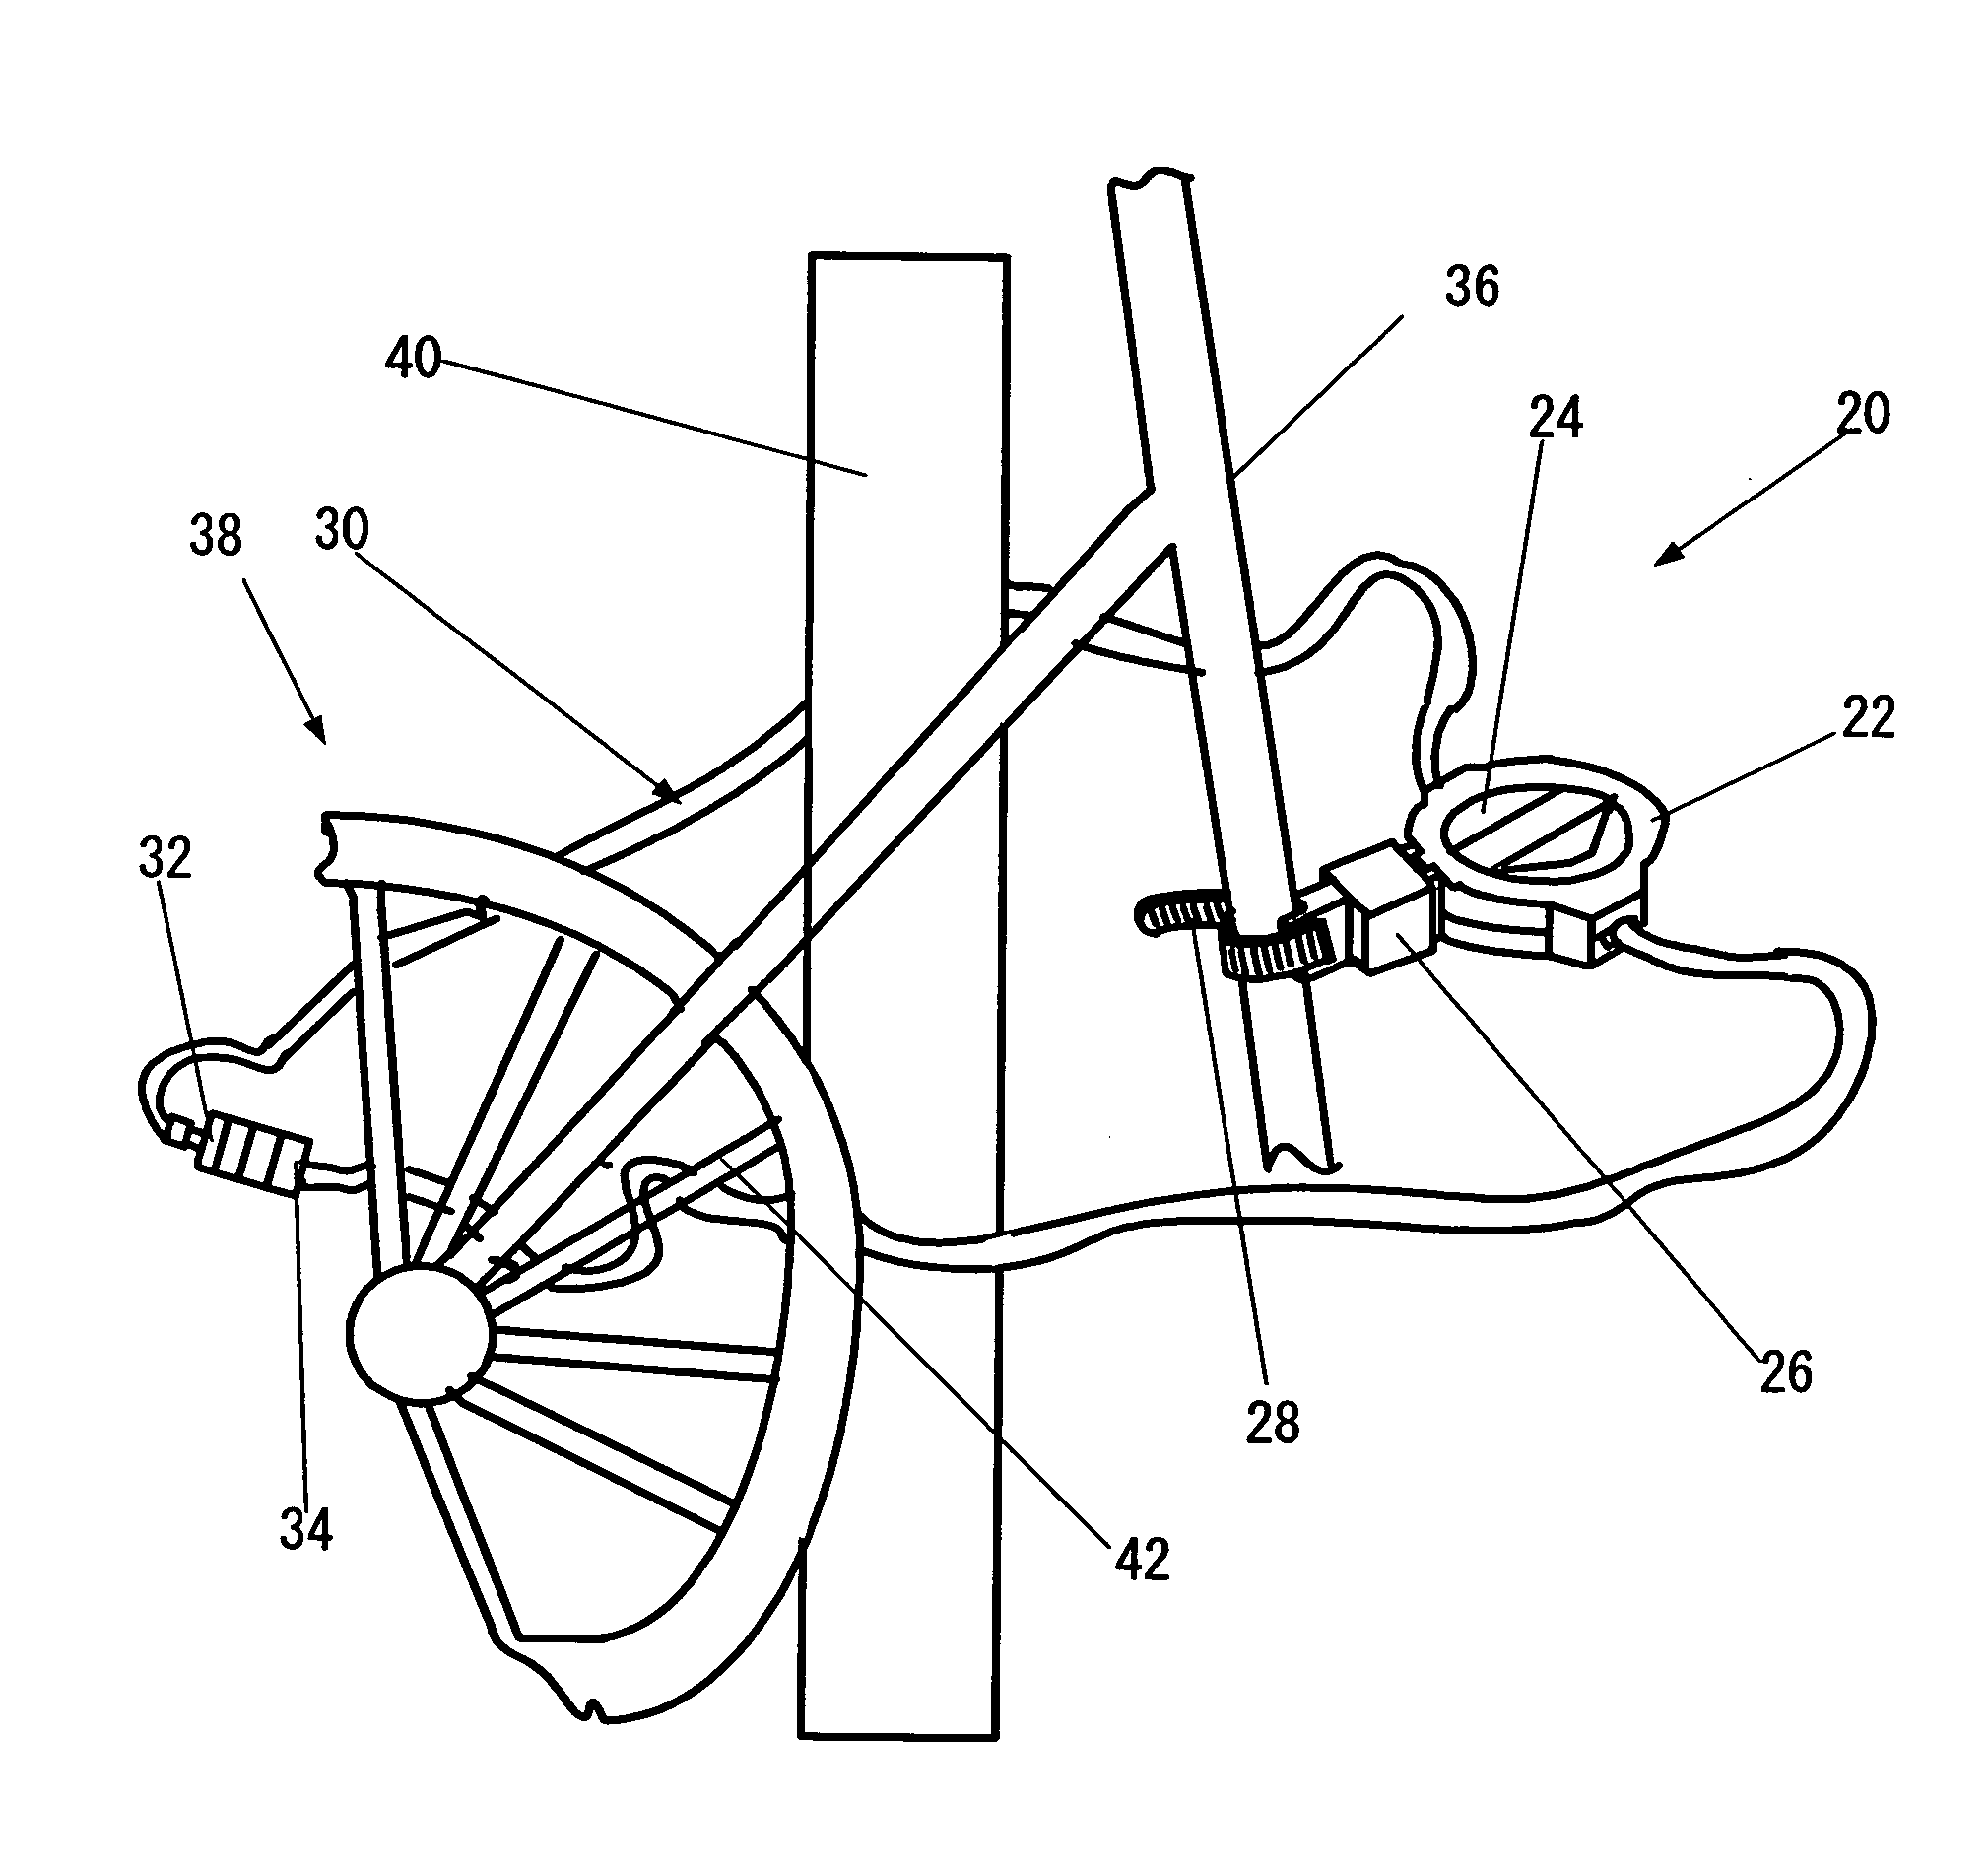 Anti-theft locking device with a flexible cable